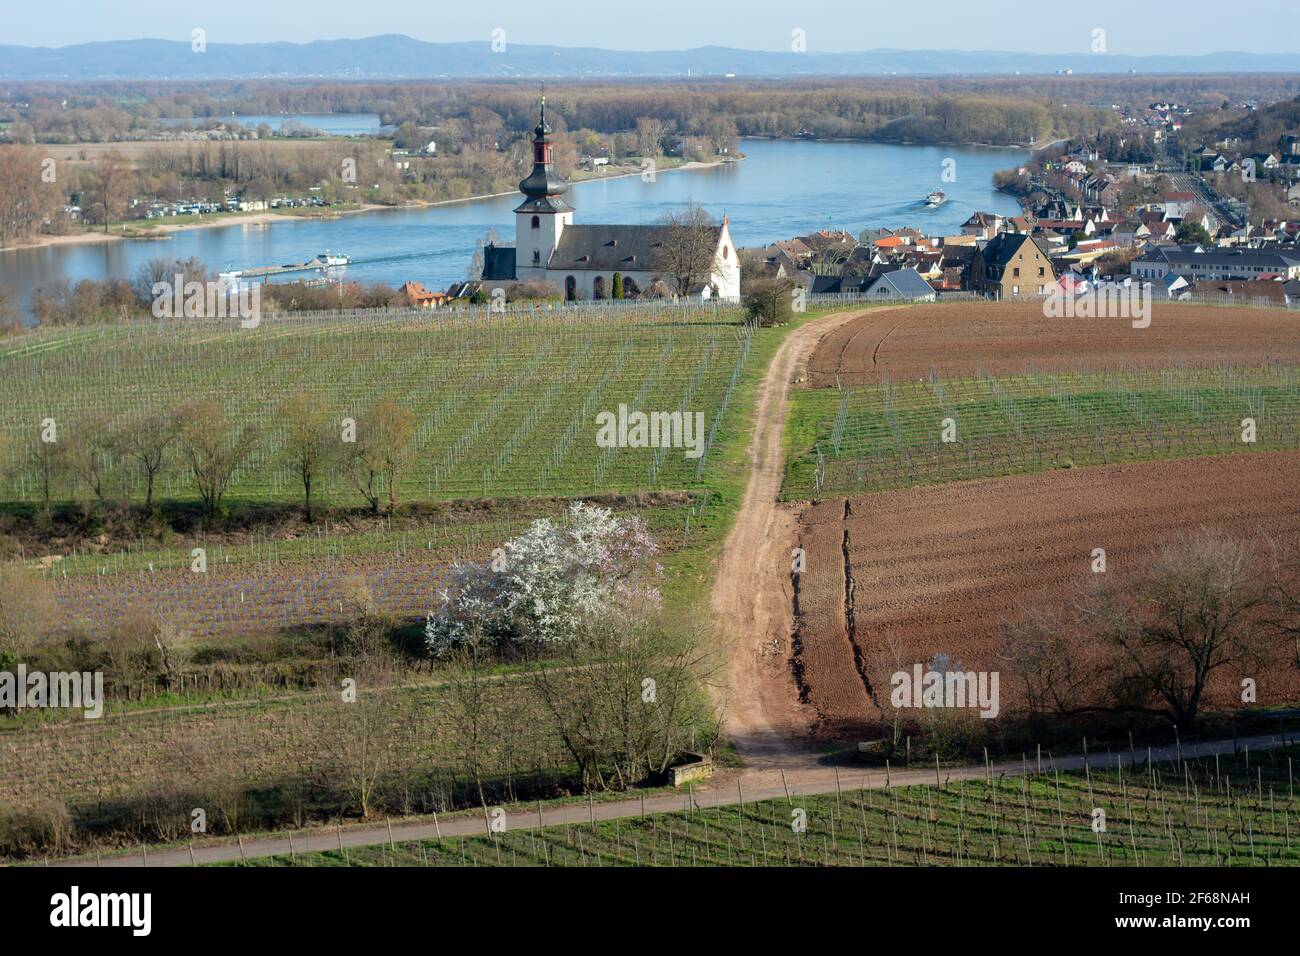 Spring colors and a view on the village Nierstein with vineyards and the river rhine at daylight Stock Photo